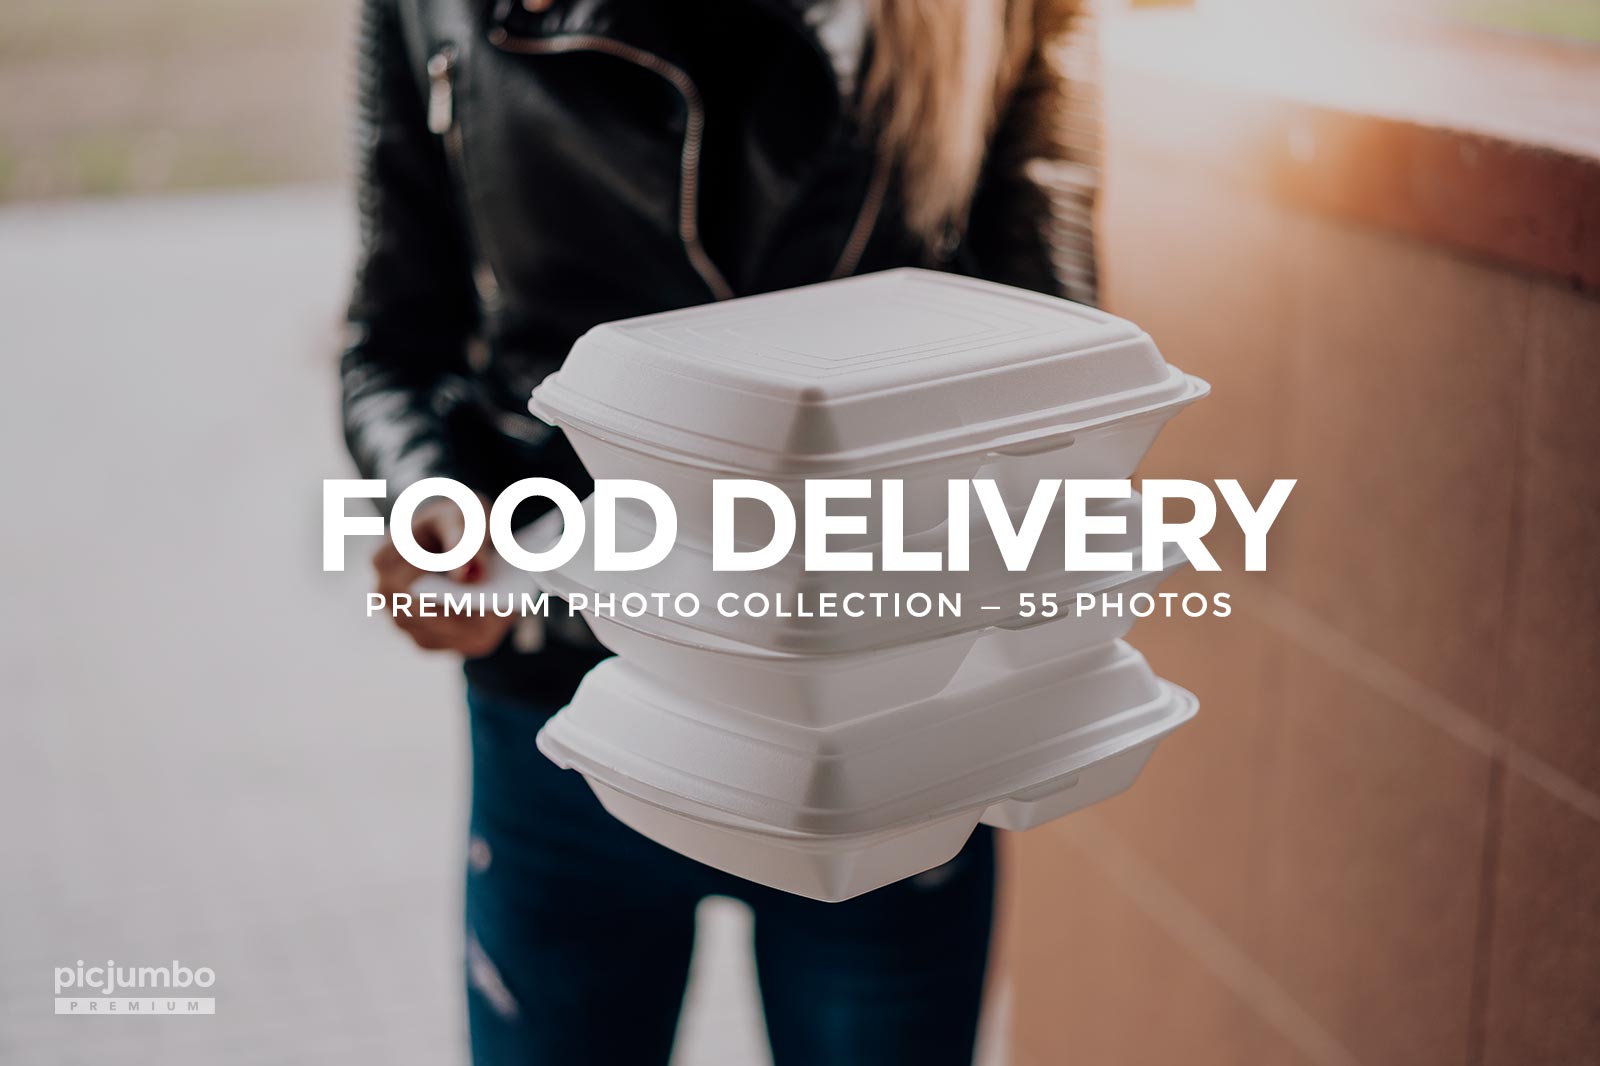 Download hi-res stock photos from our Food Delivery PREMIUM Collection!